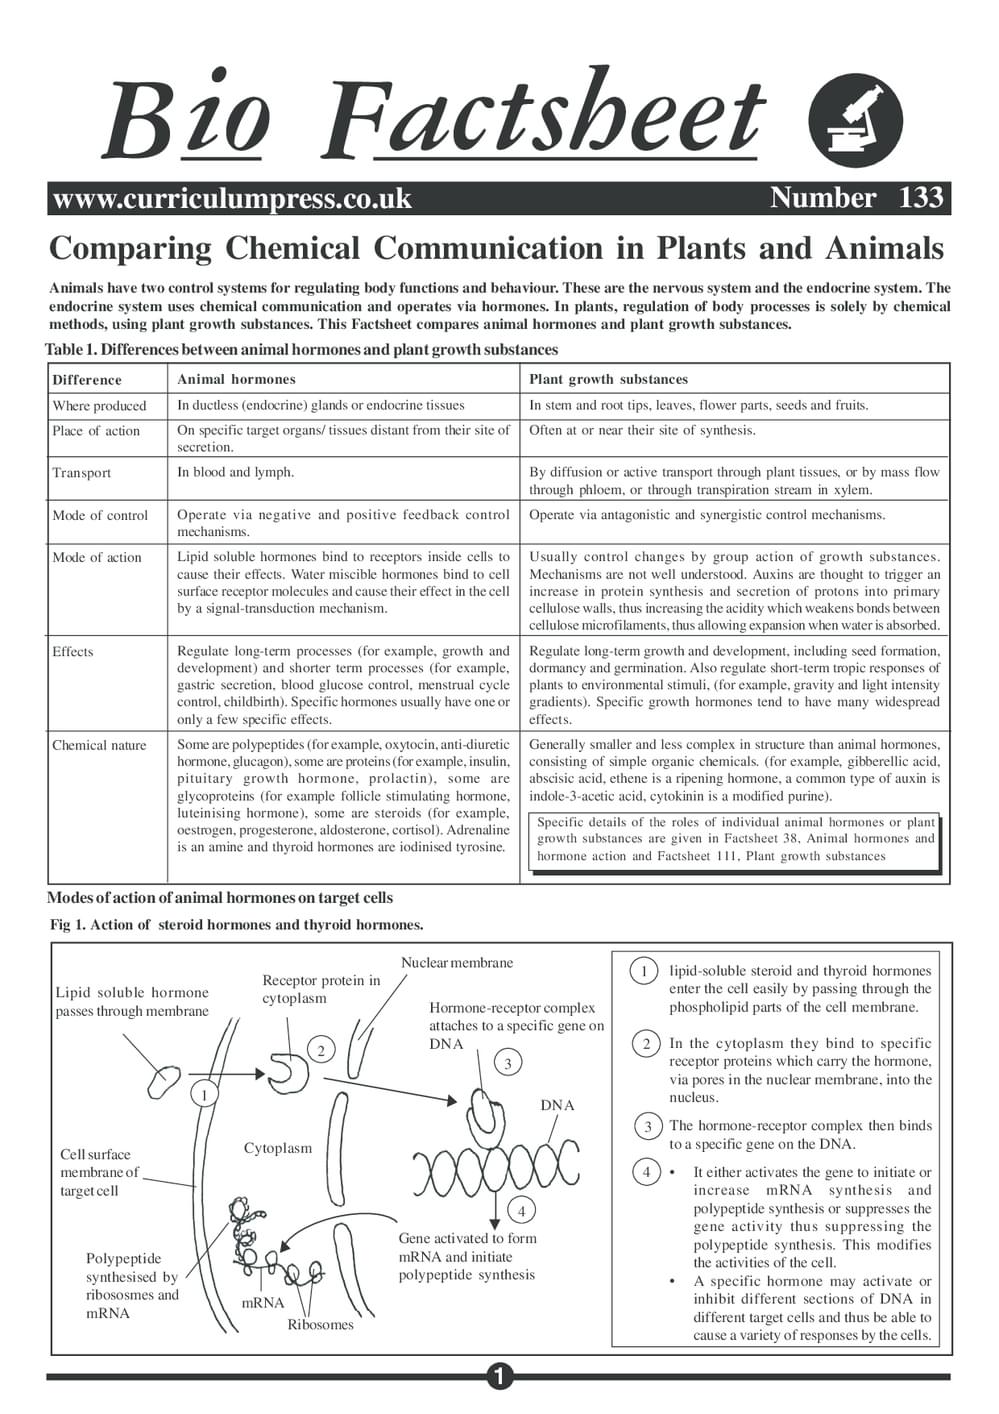 Comparing Chemical Communication in Plants and Animals - Curriculum Press